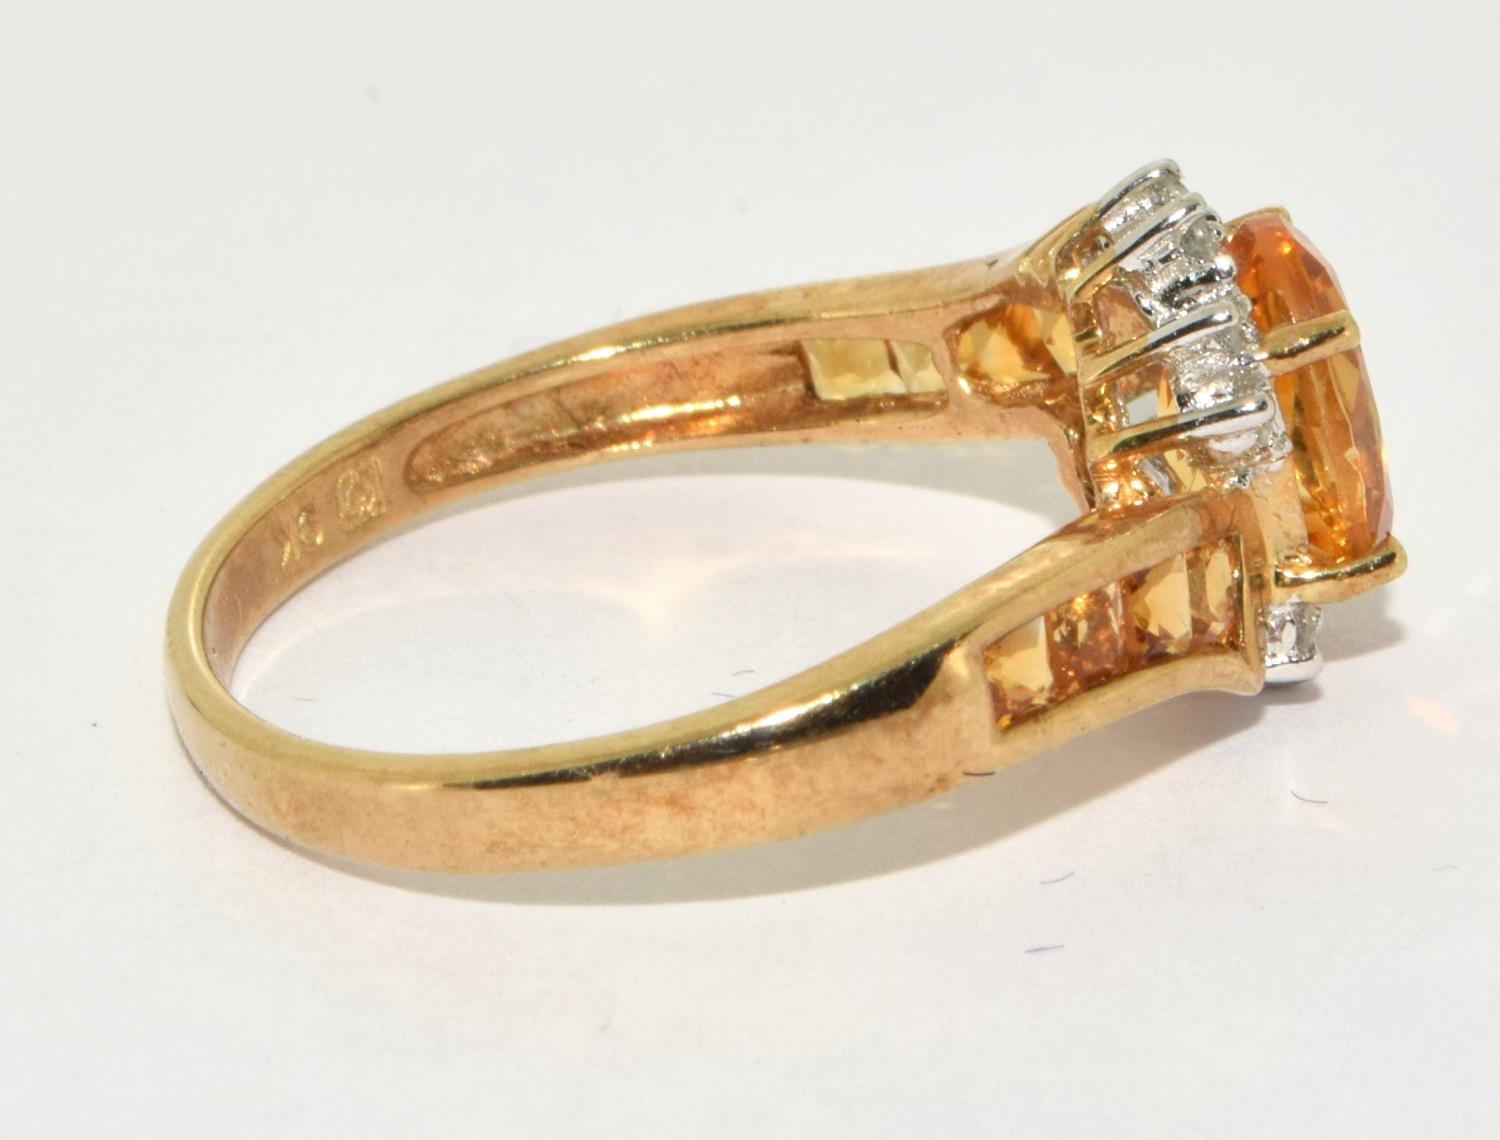 9ct gold ladies Diamond and Amber set ring with amber stones to the shank size P - Image 4 of 5